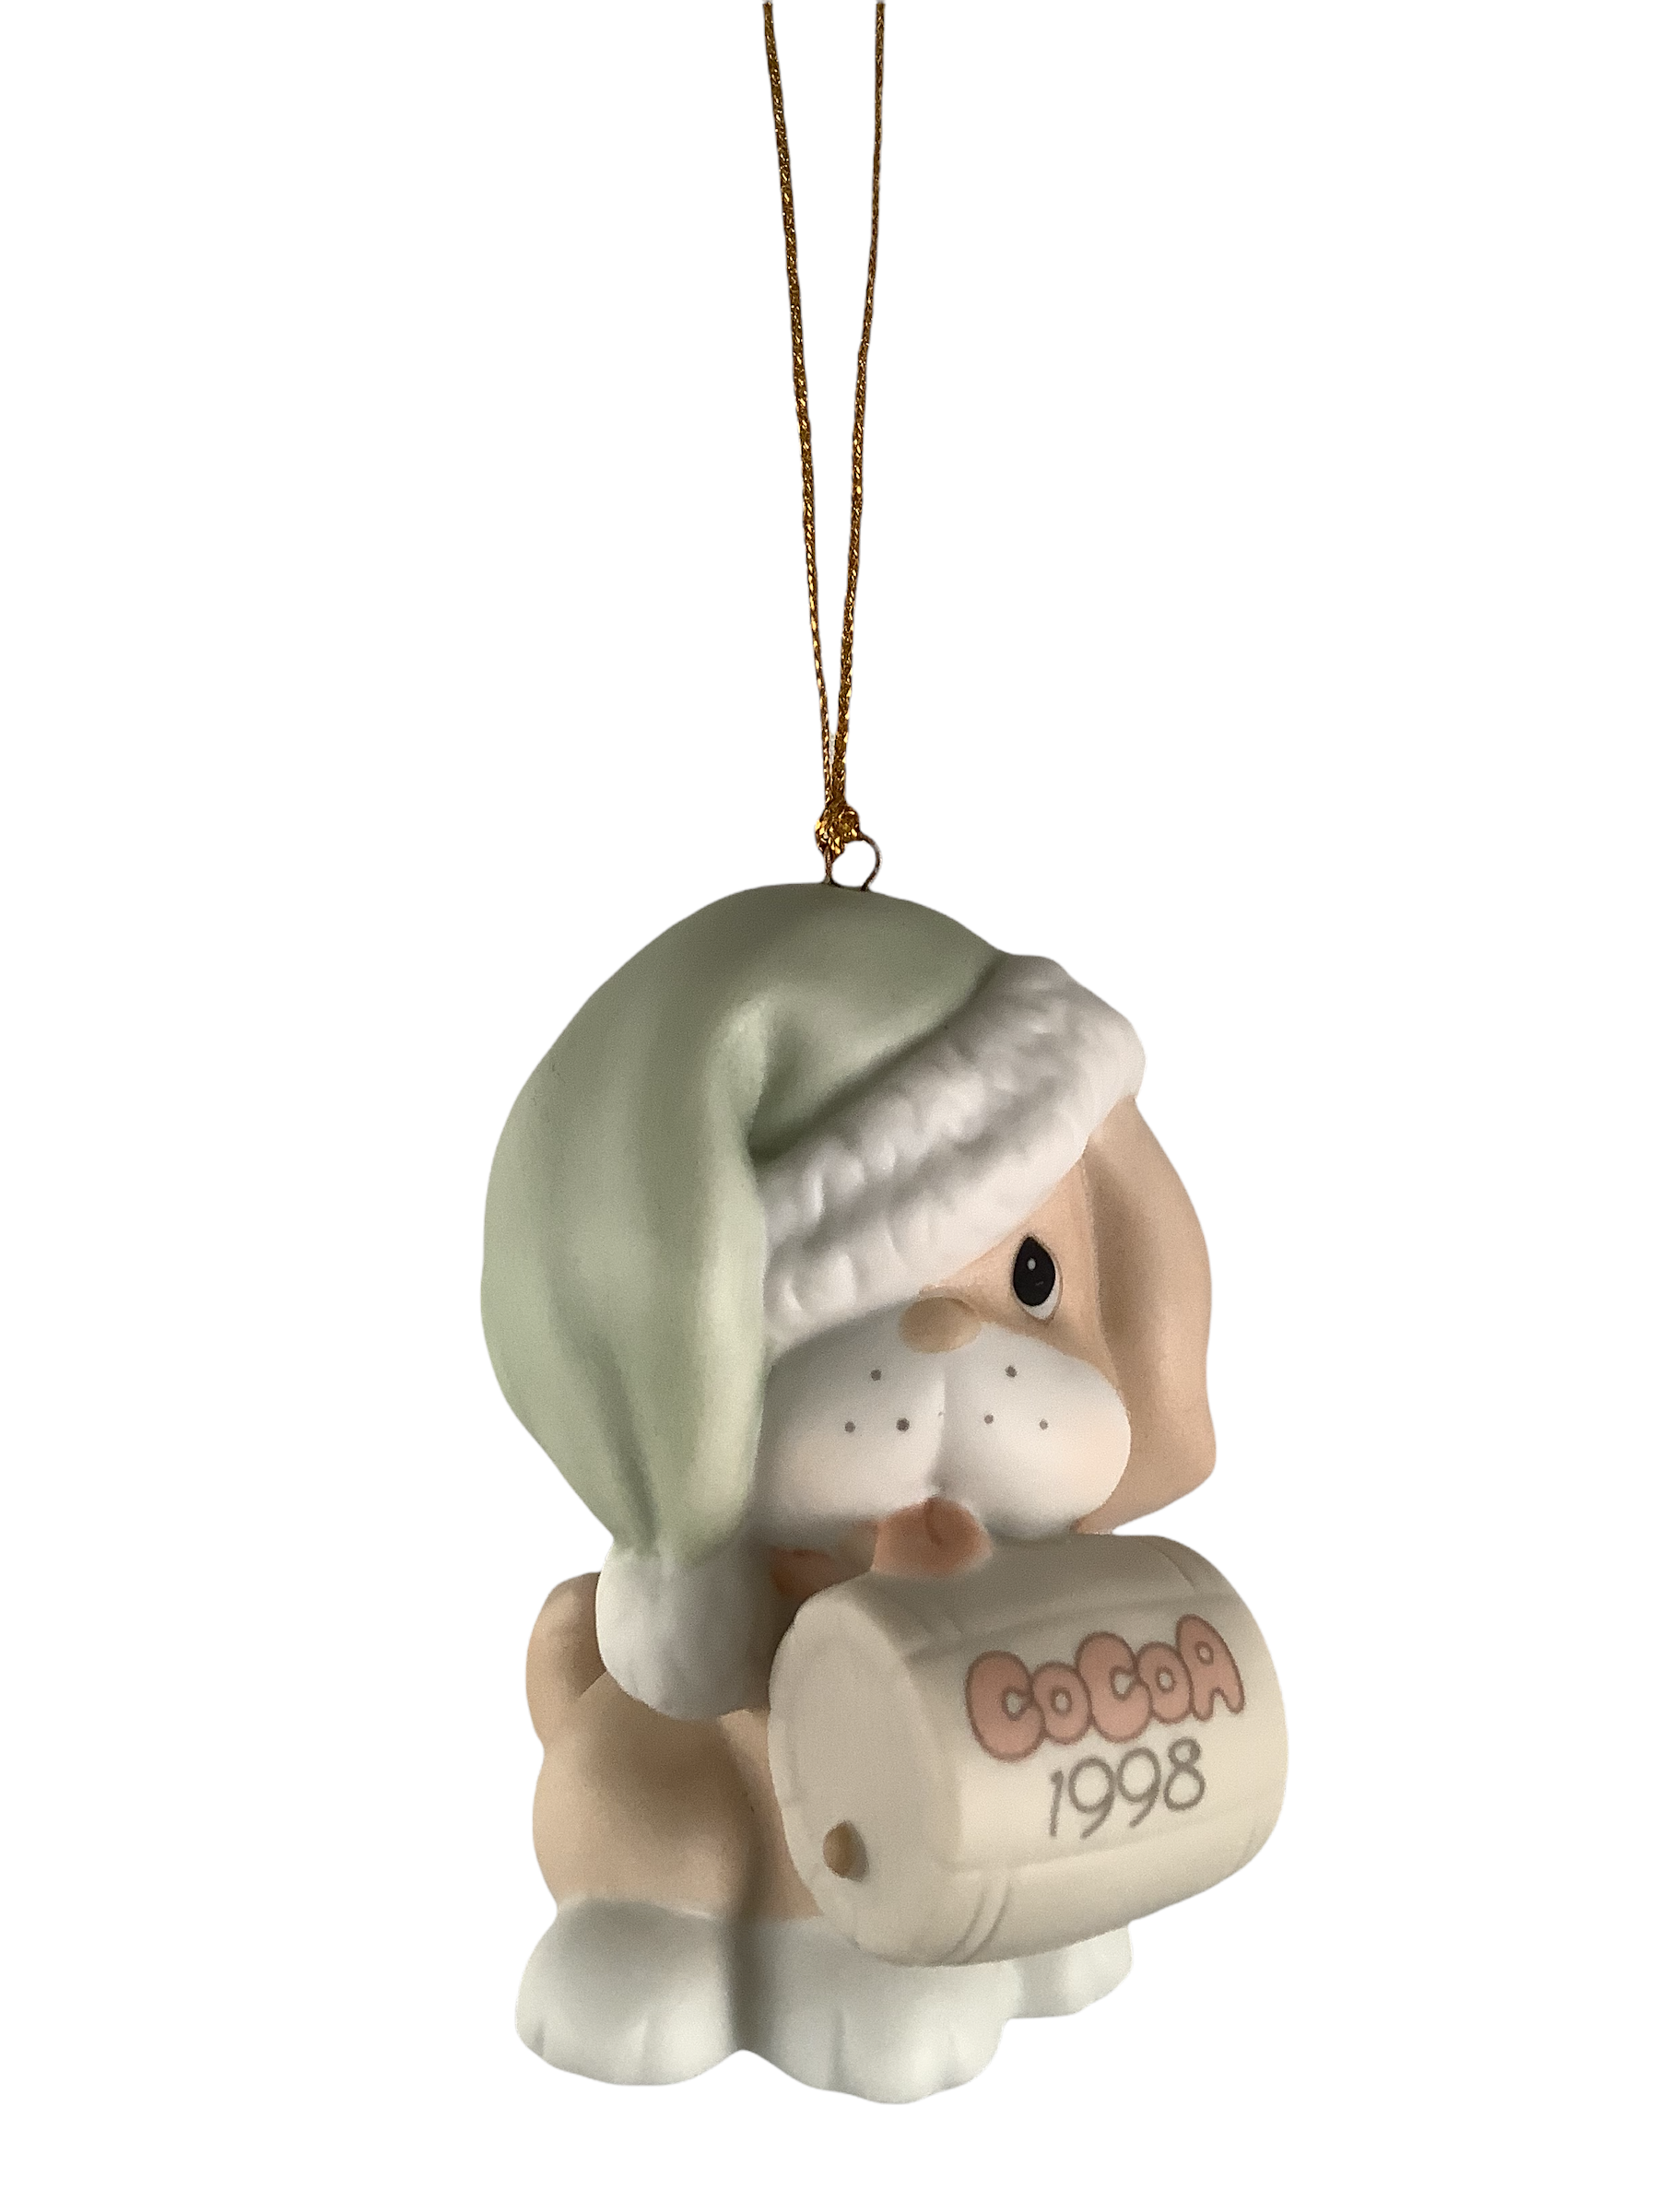 I'll Be Dog-ged It's That Season Again - 1998 Dated Precious Moment Ornament